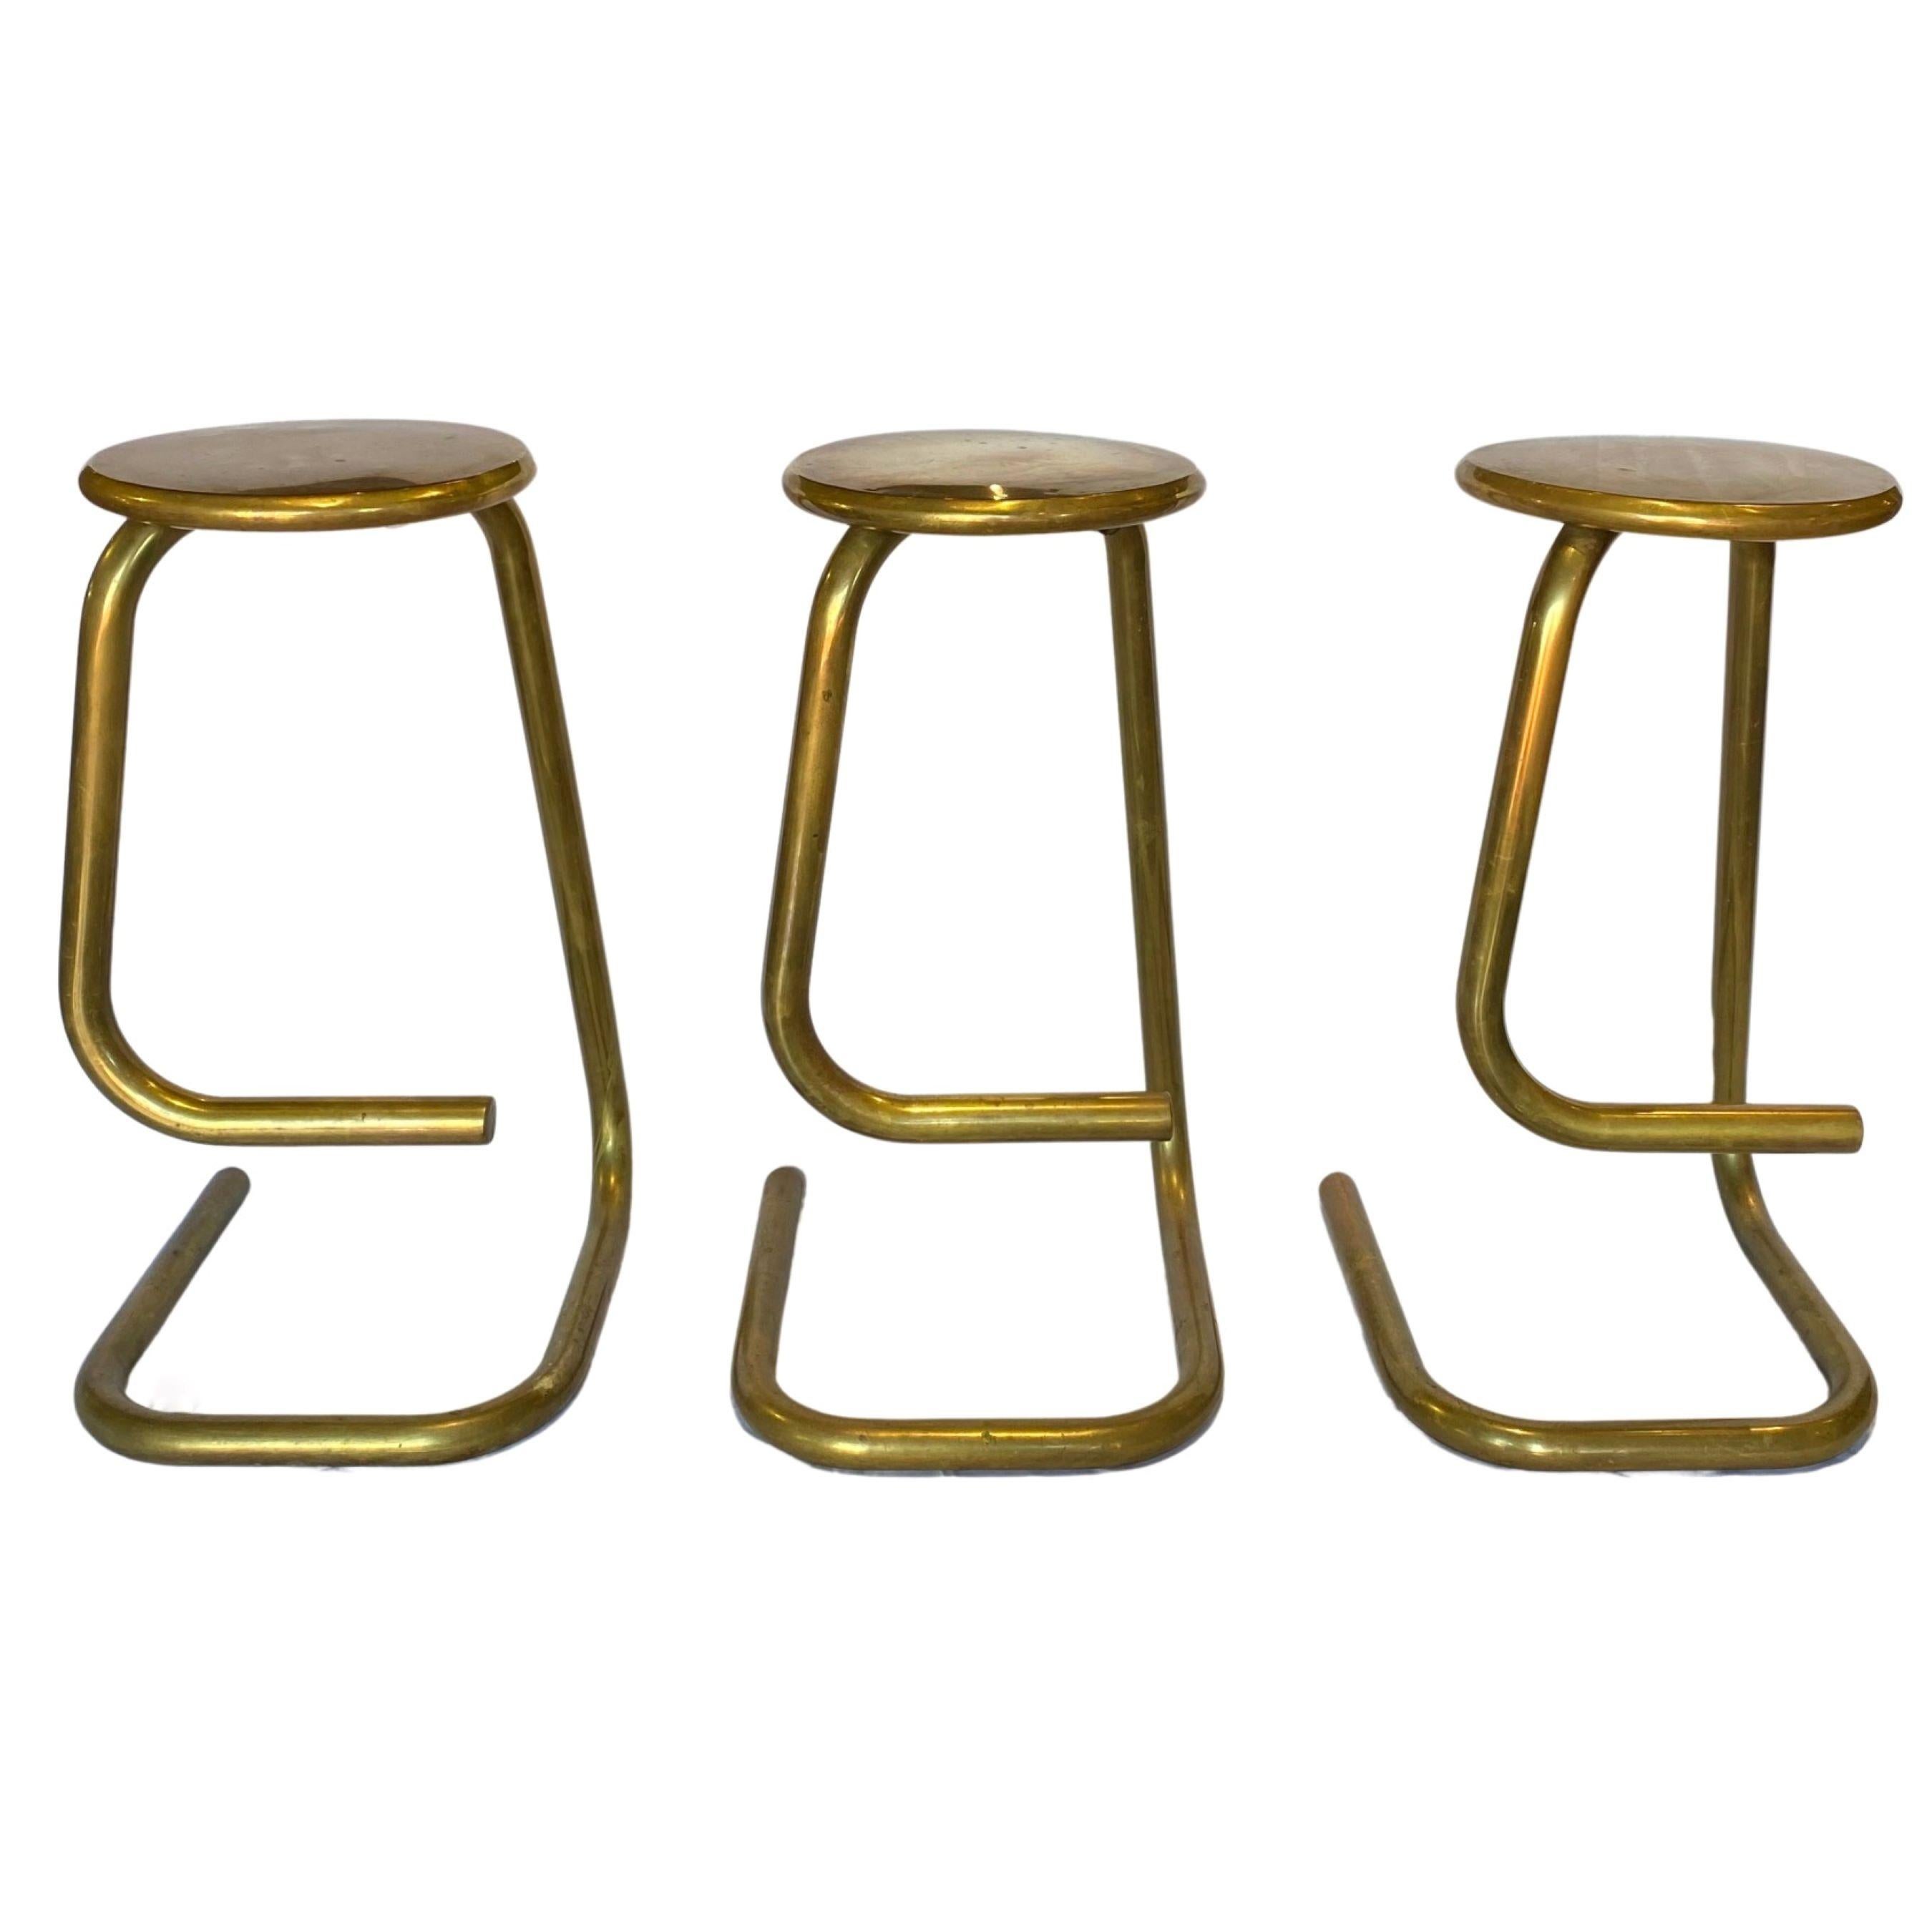 Kinetics Furniture
Canada
1970's
Extremely Rare Set of 3 Brass Paperclip Bar Stools
Designed by Hugh Hamilton & Philip Salmon
Each Stool weighs 24+ LBS.
 